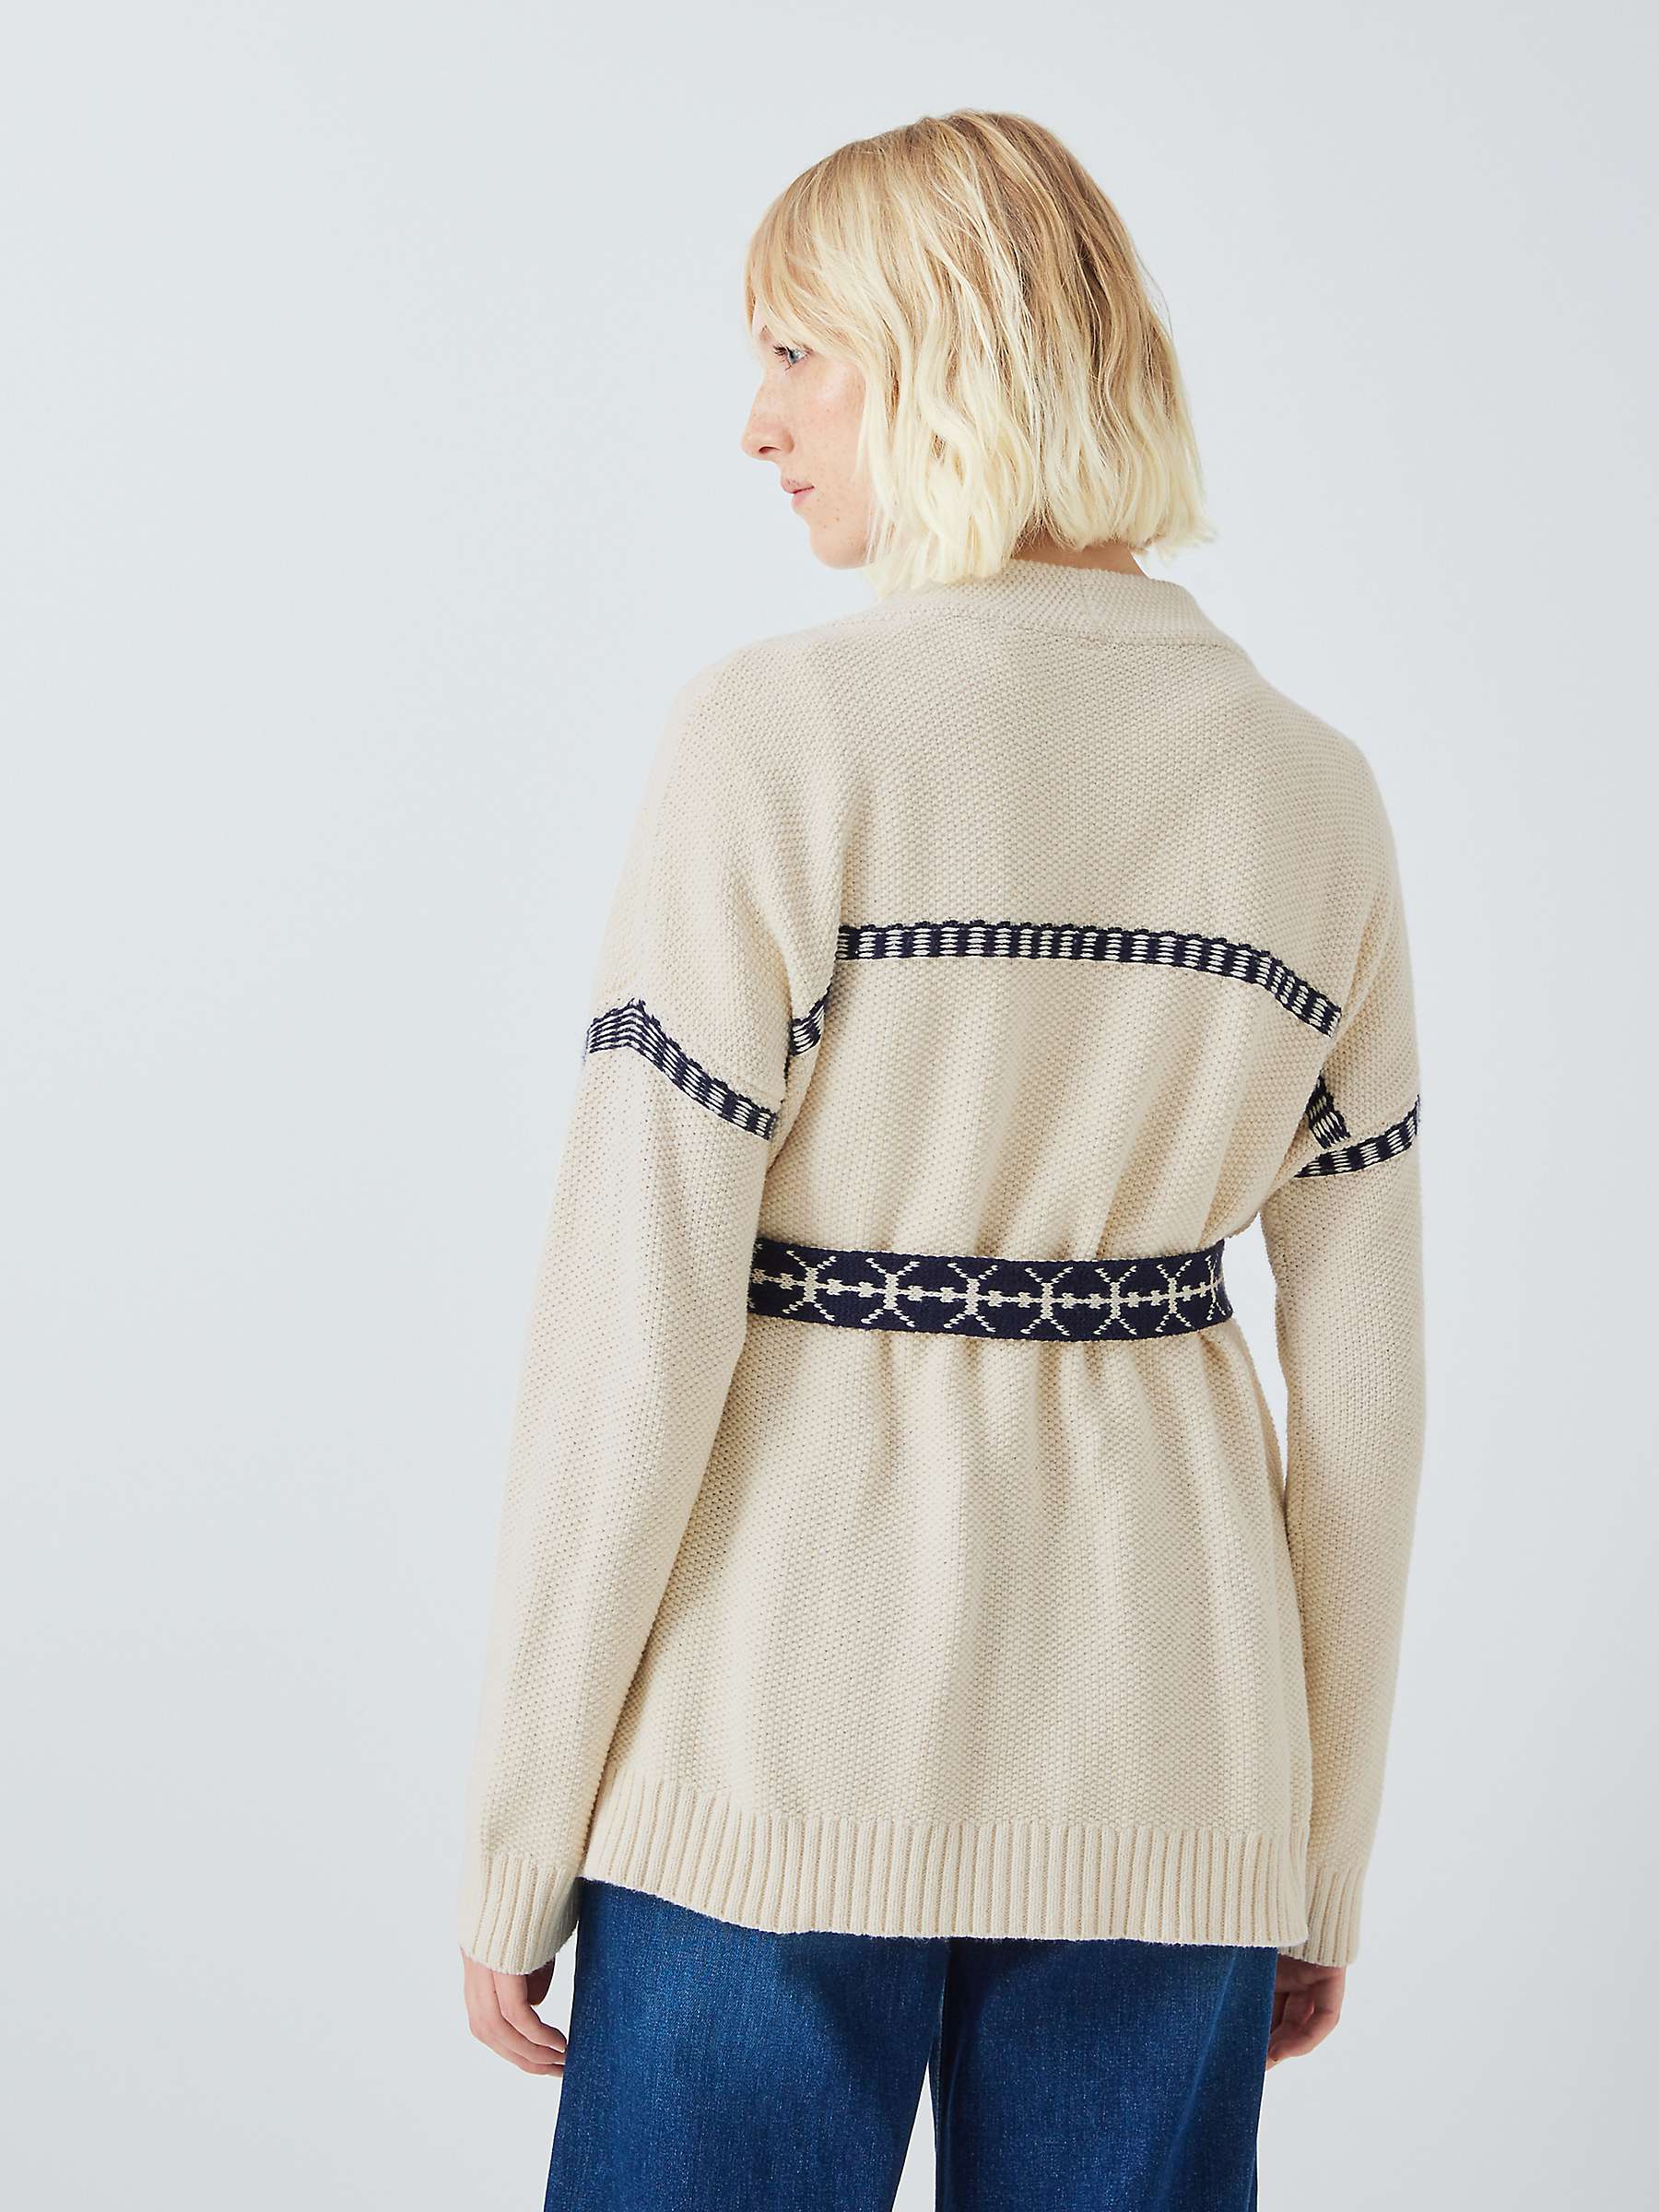 Buy AND/OR Belted Wool Blend Cardigan, Cream/Navy Online at johnlewis.com